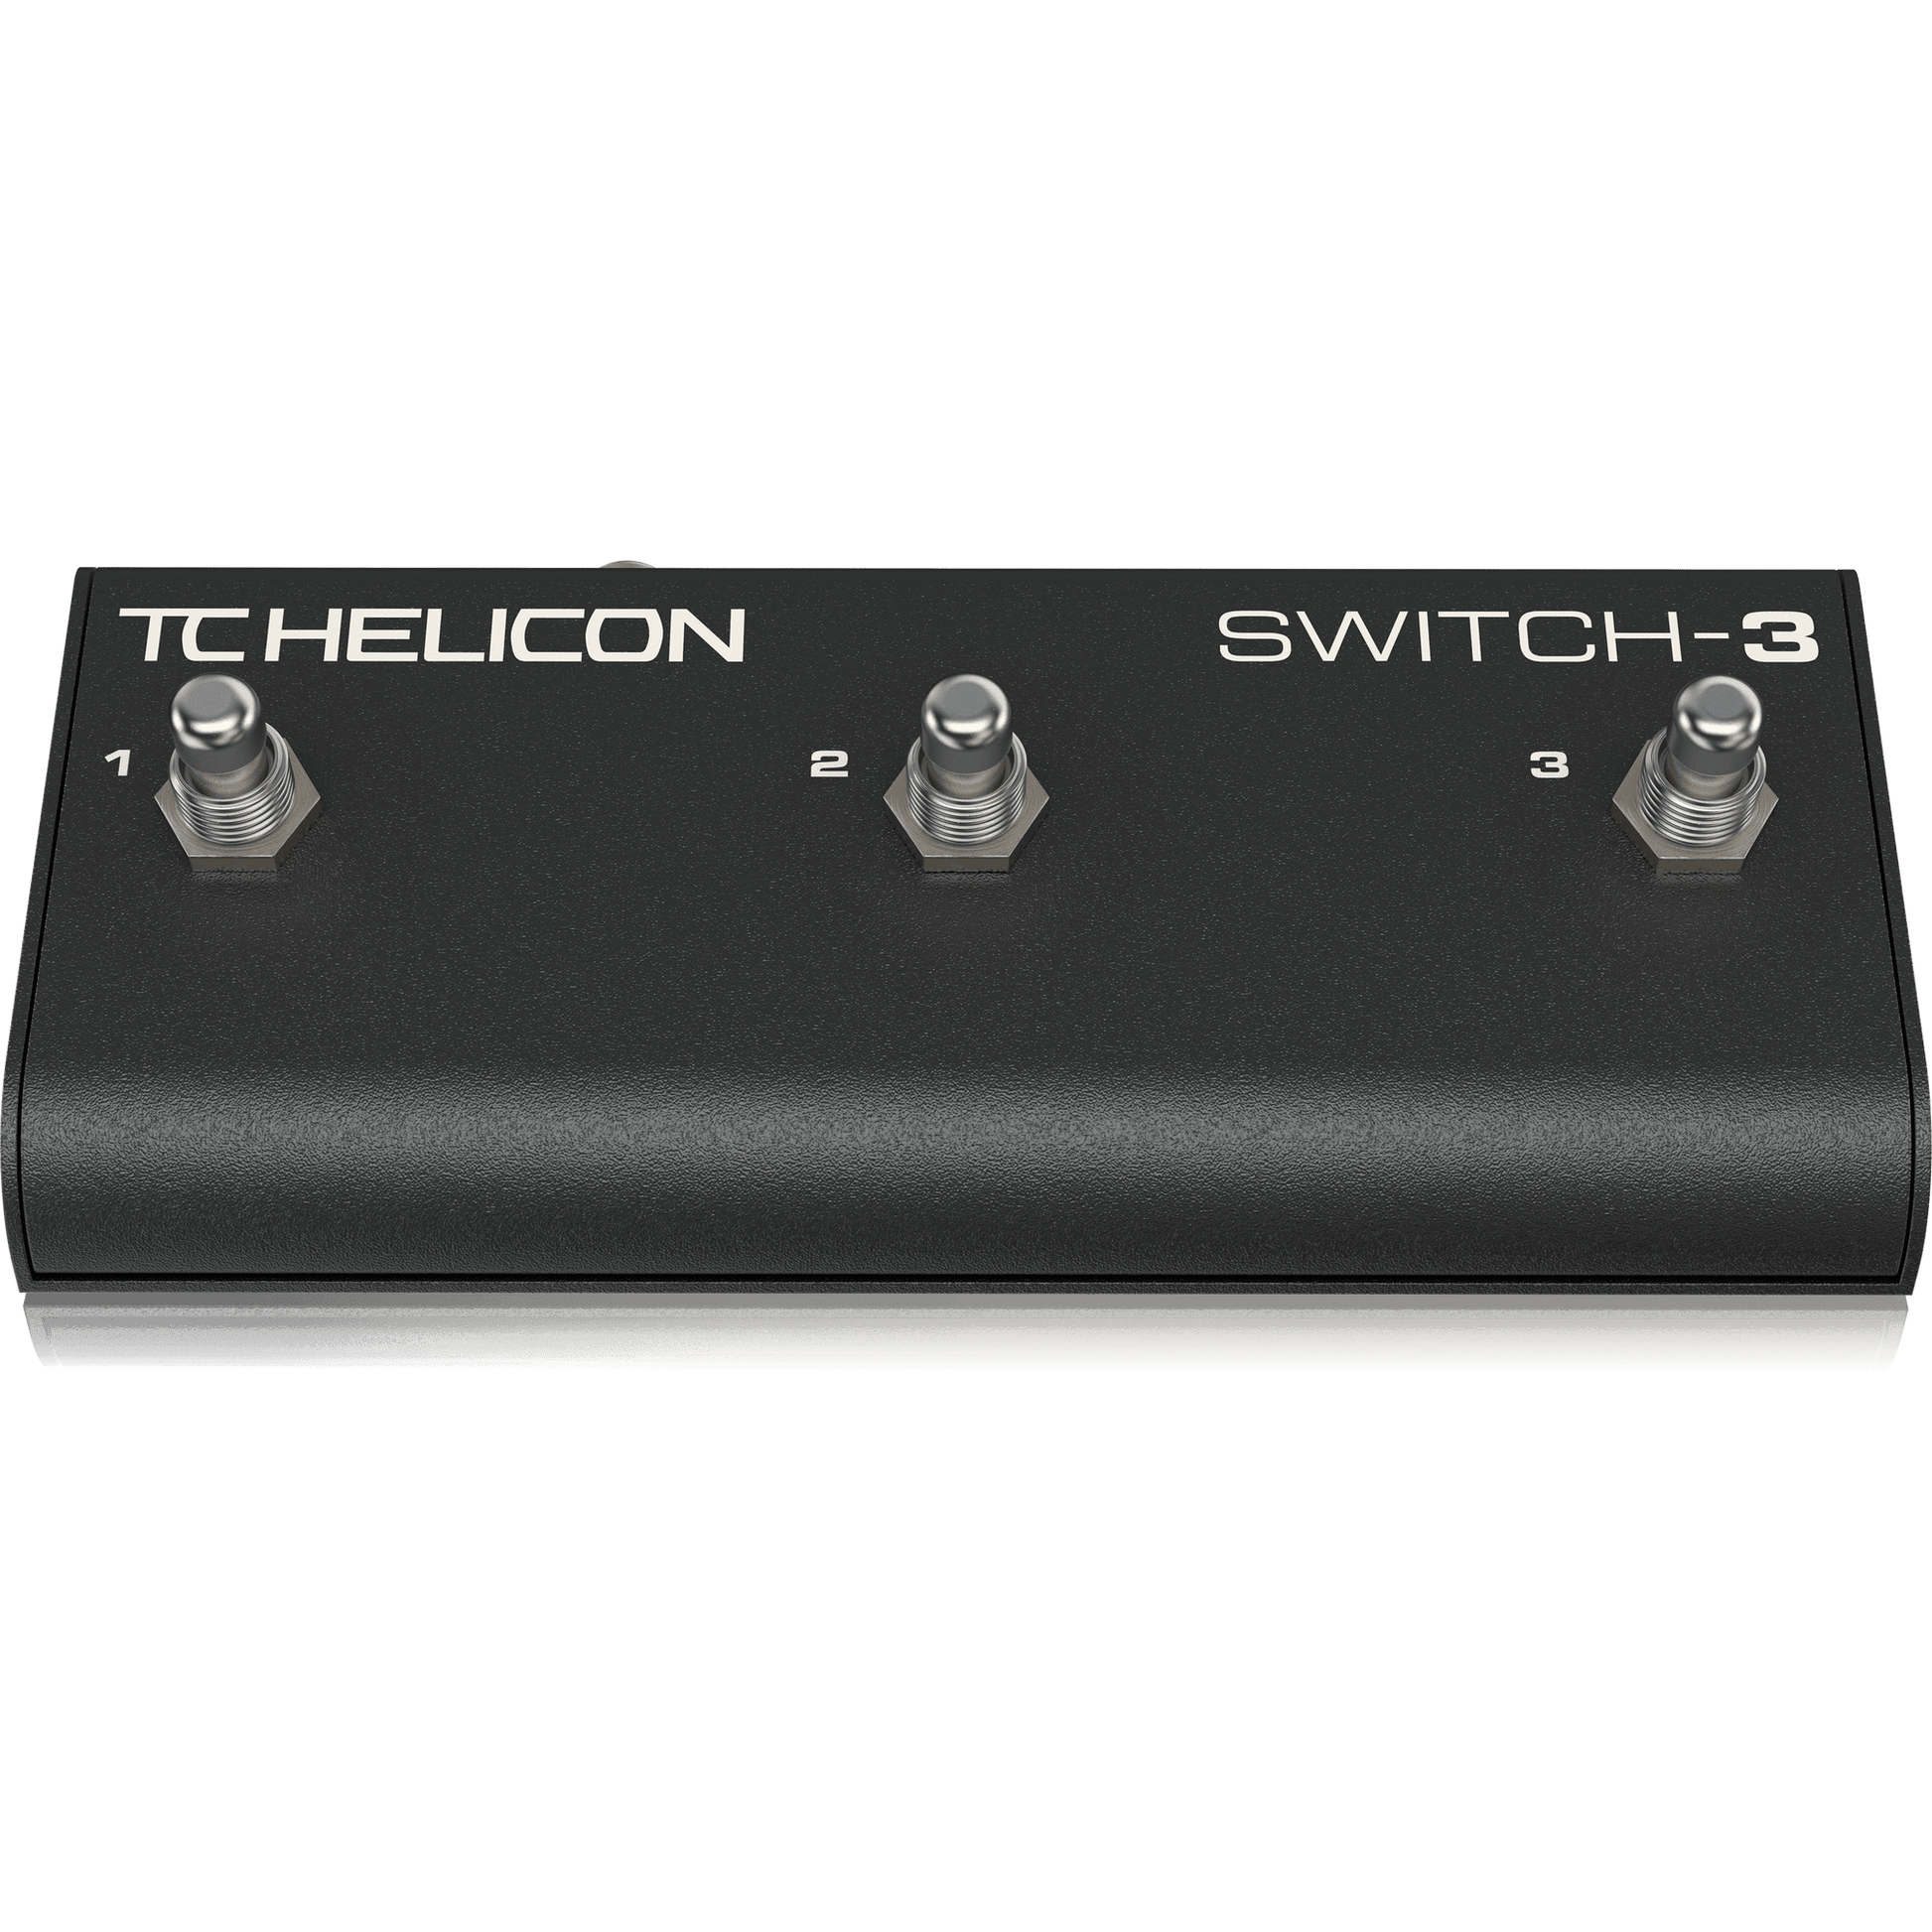 TC Helicon SWITCH-3 Sturdy 3-Switch Accessory Pedal for Expanded Remote Control